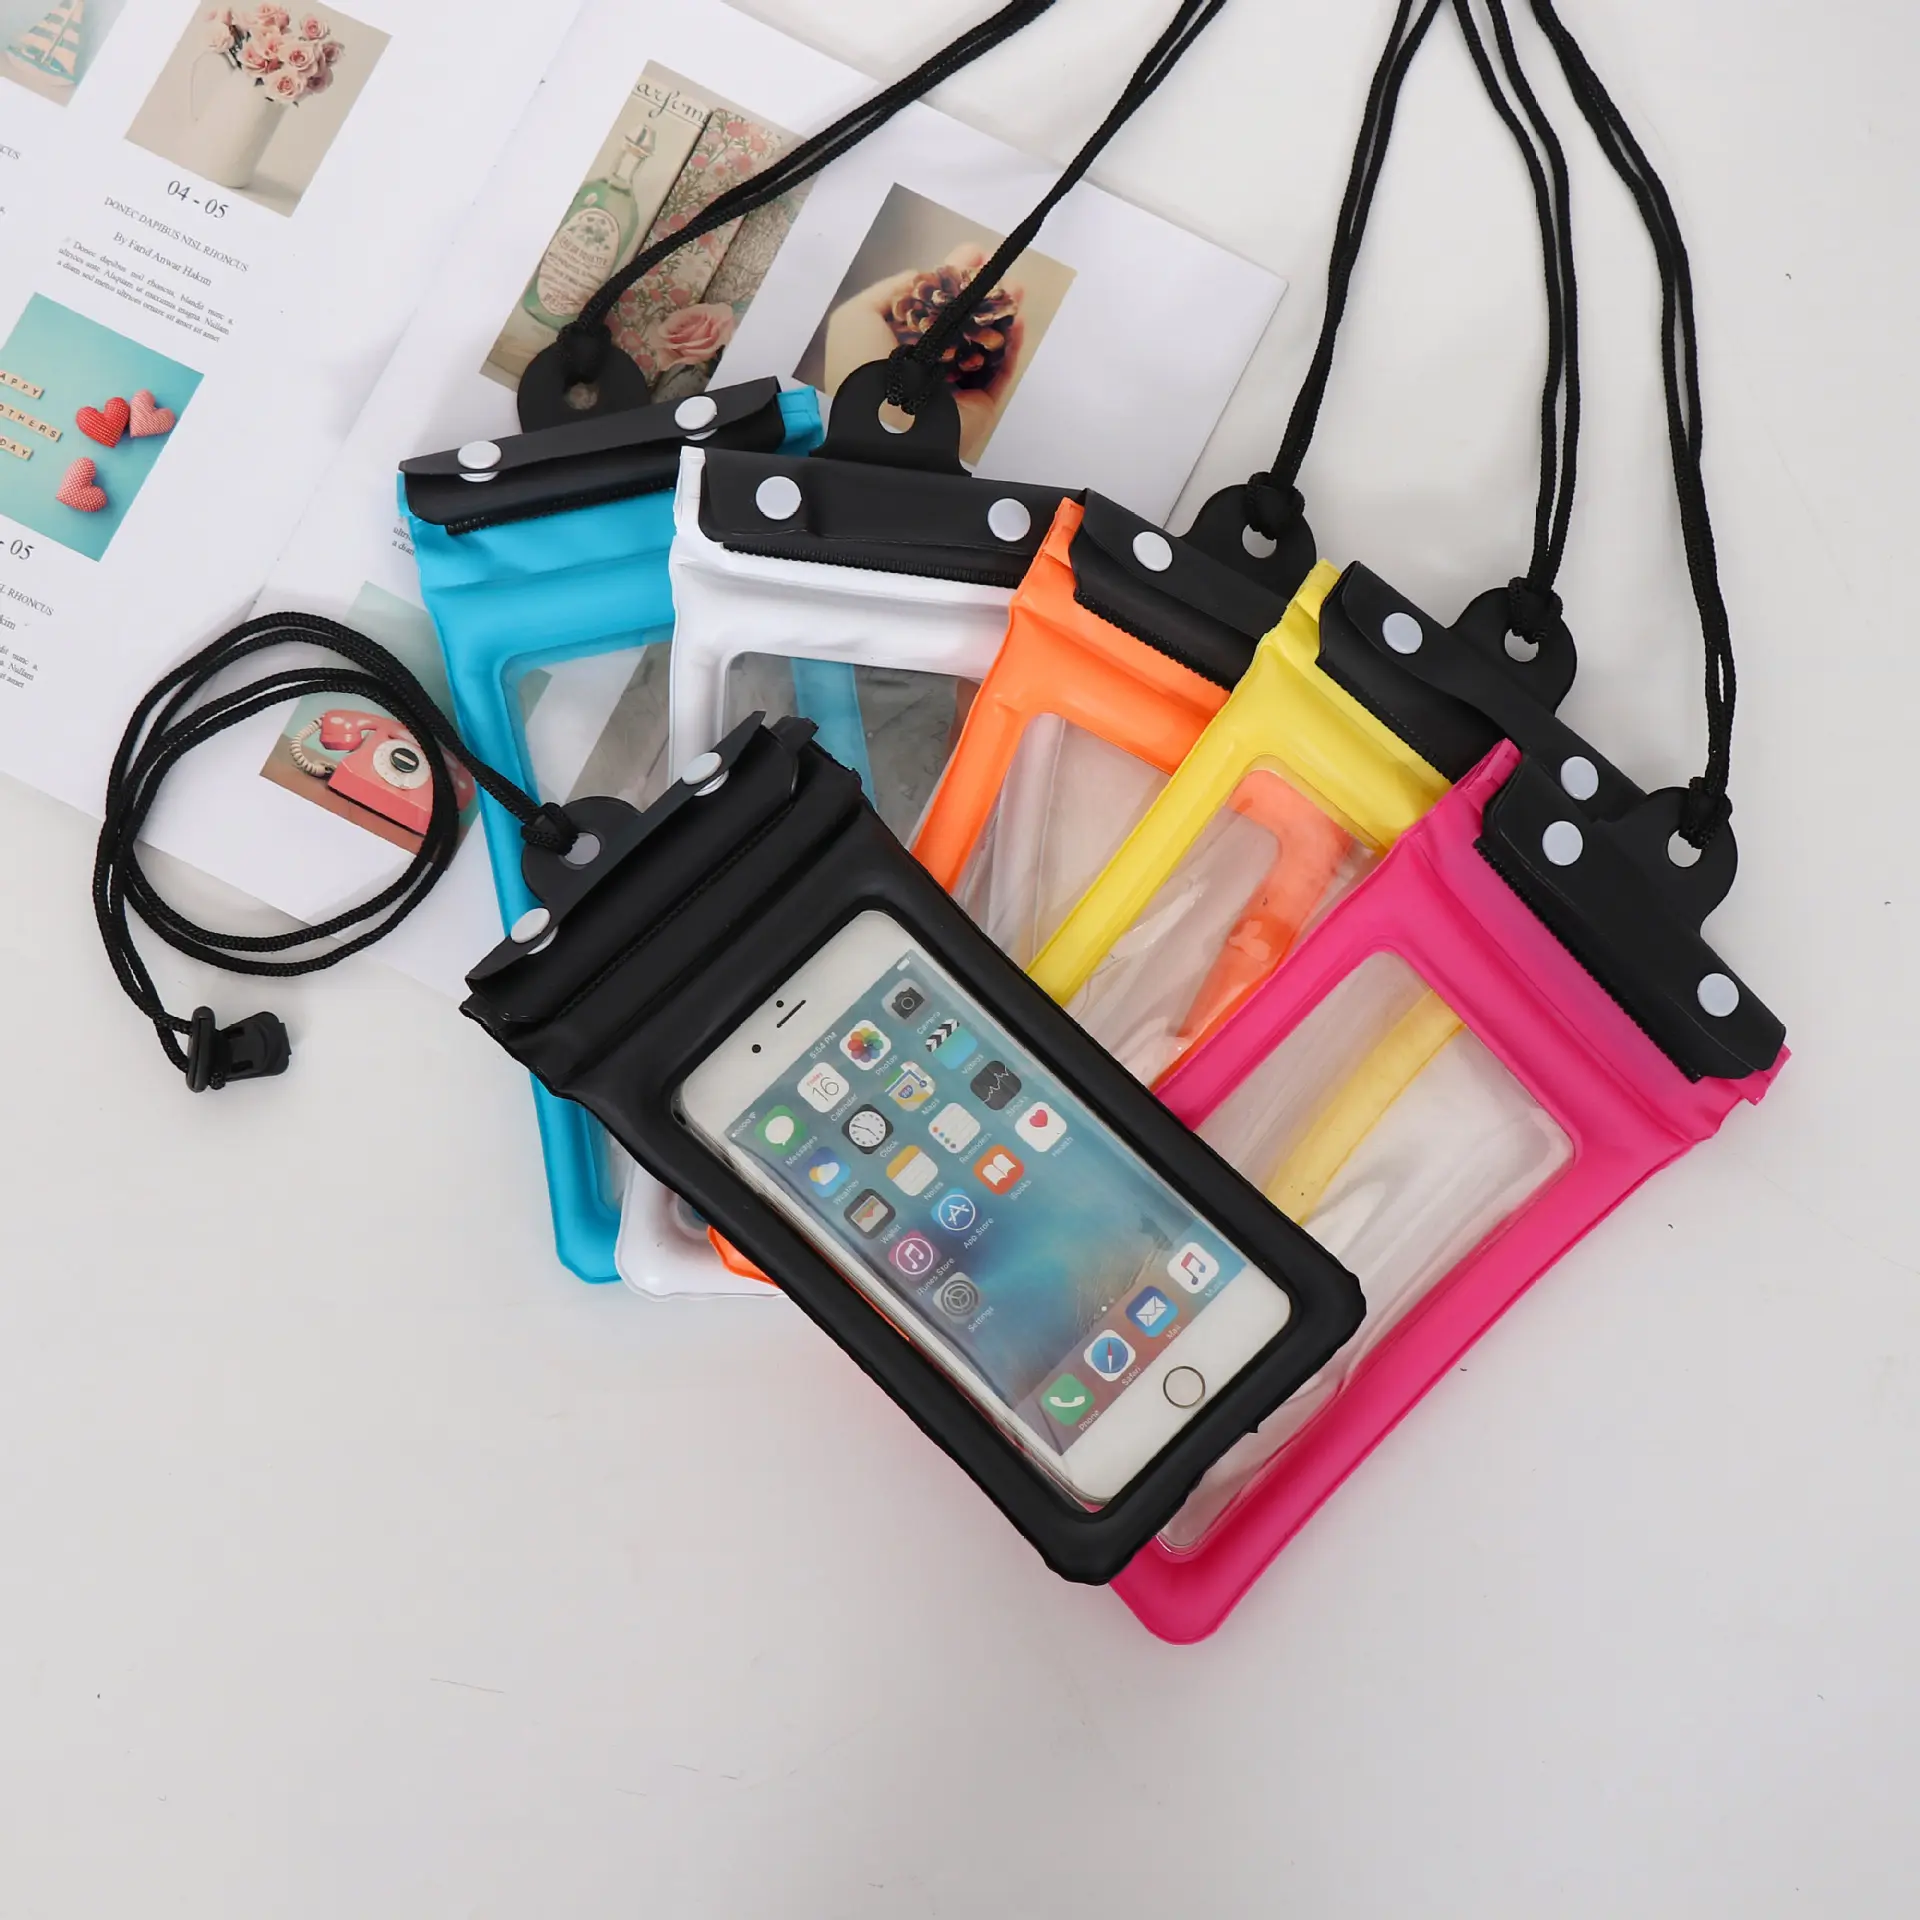 Hot Sale PVC Bubble Waterproof Mobile Phone Dry Bag with Strap for iPhone/Samsung/Huaweiile